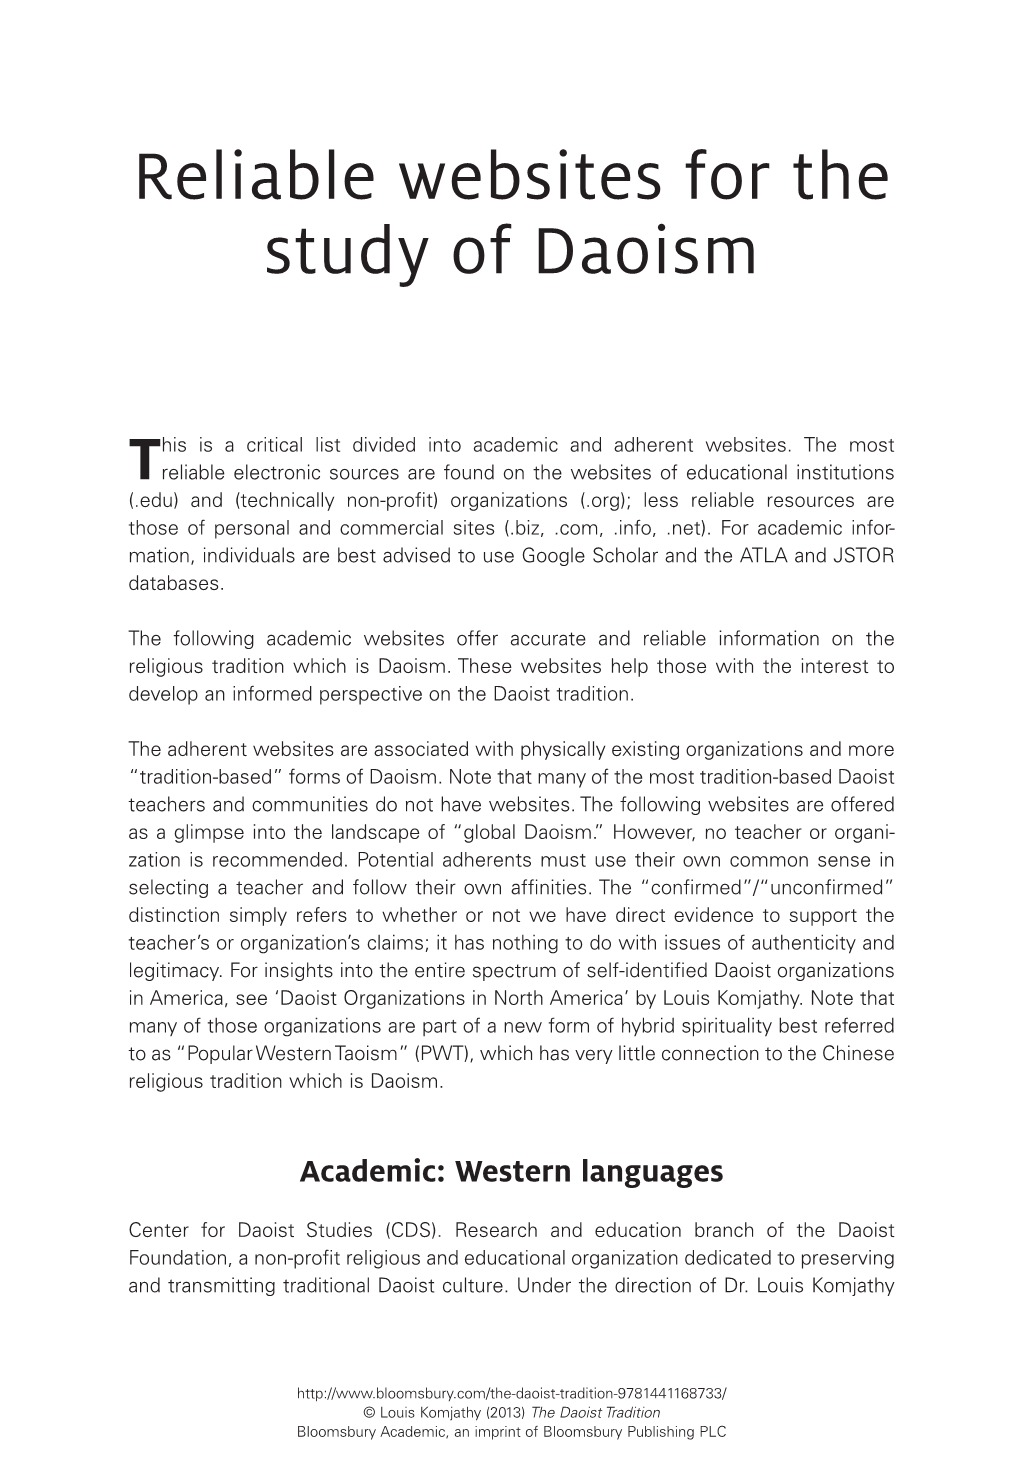 Reliable Websites for the Study of Daoism